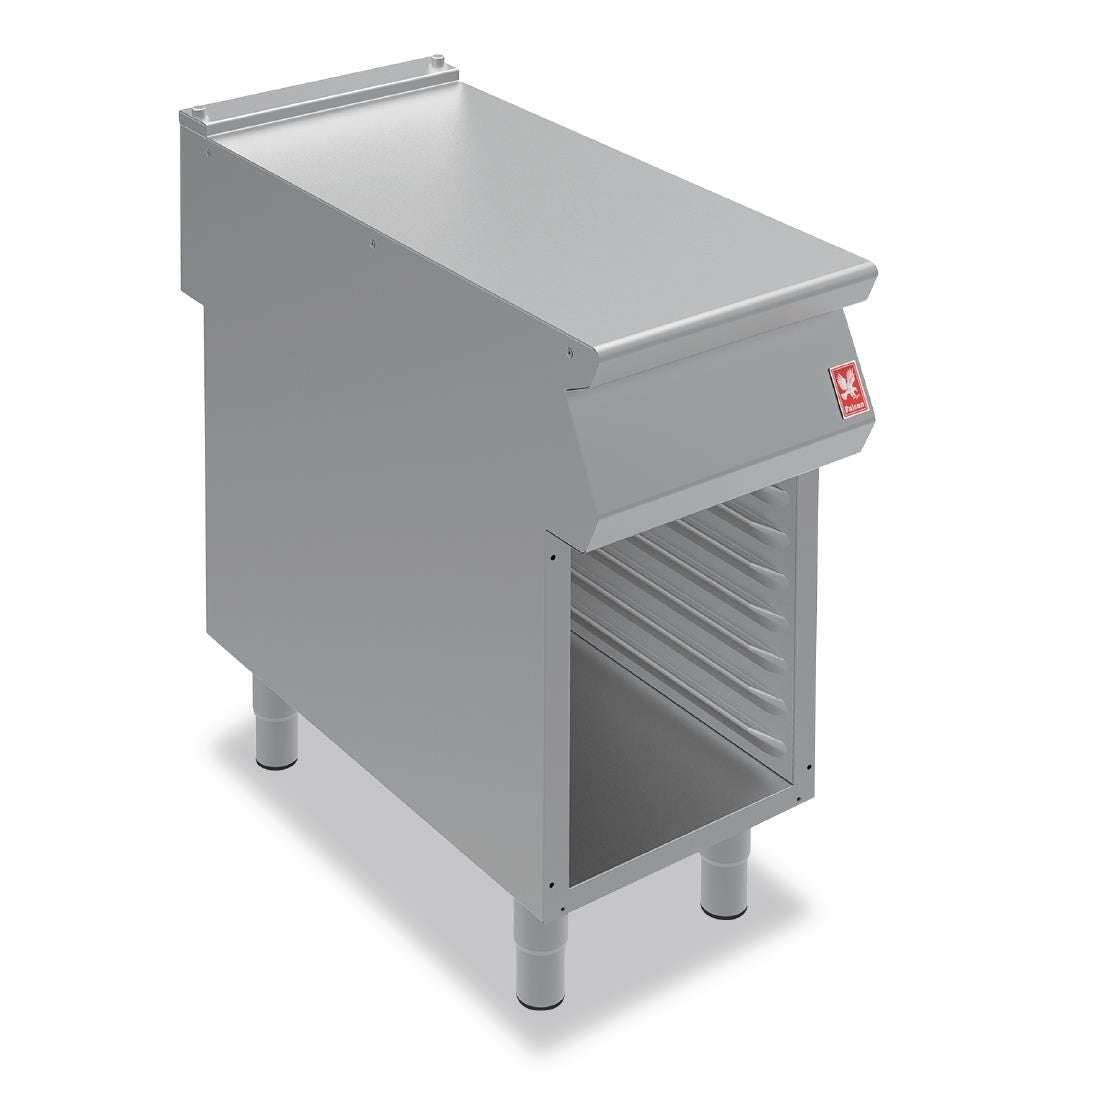 Falcon F900 Open Cabinet With Pressed Runners on Legs N941 JD Catering Equipment Solutions Ltd